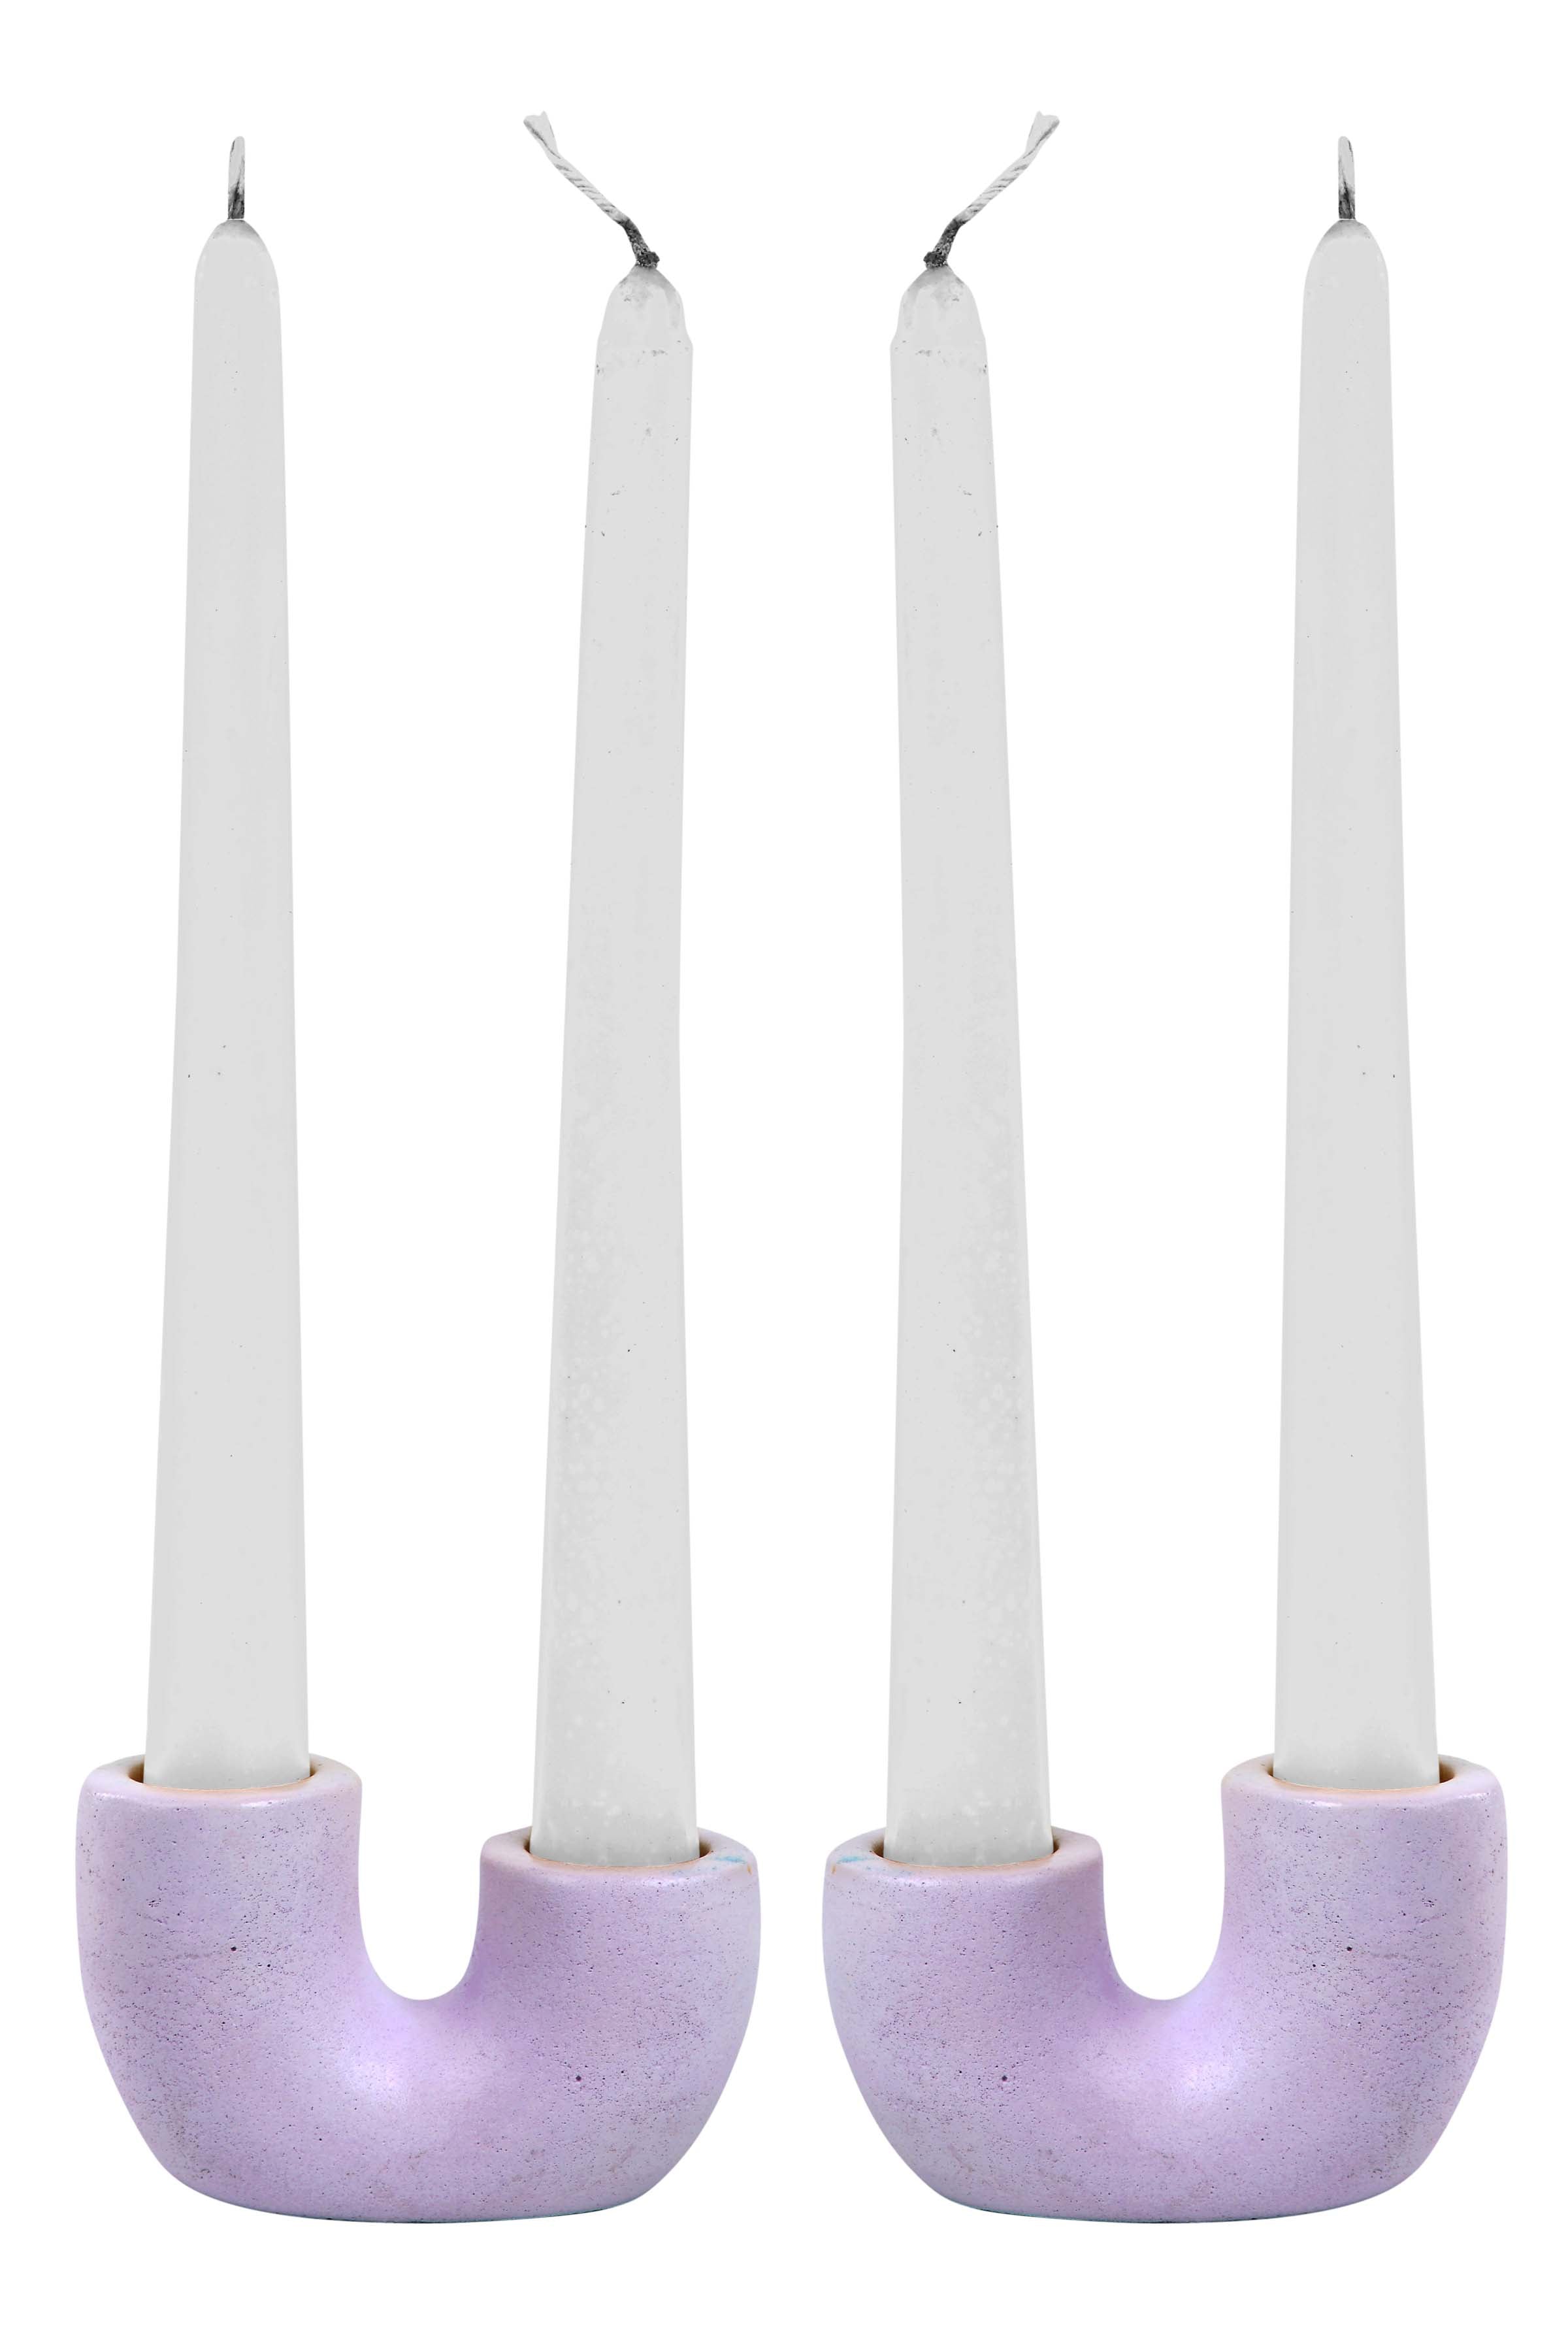 Nordic Style U Shaped Concrete Candle holder-  Purple Set of 2, 2x2.5 Inch (Set of 2)